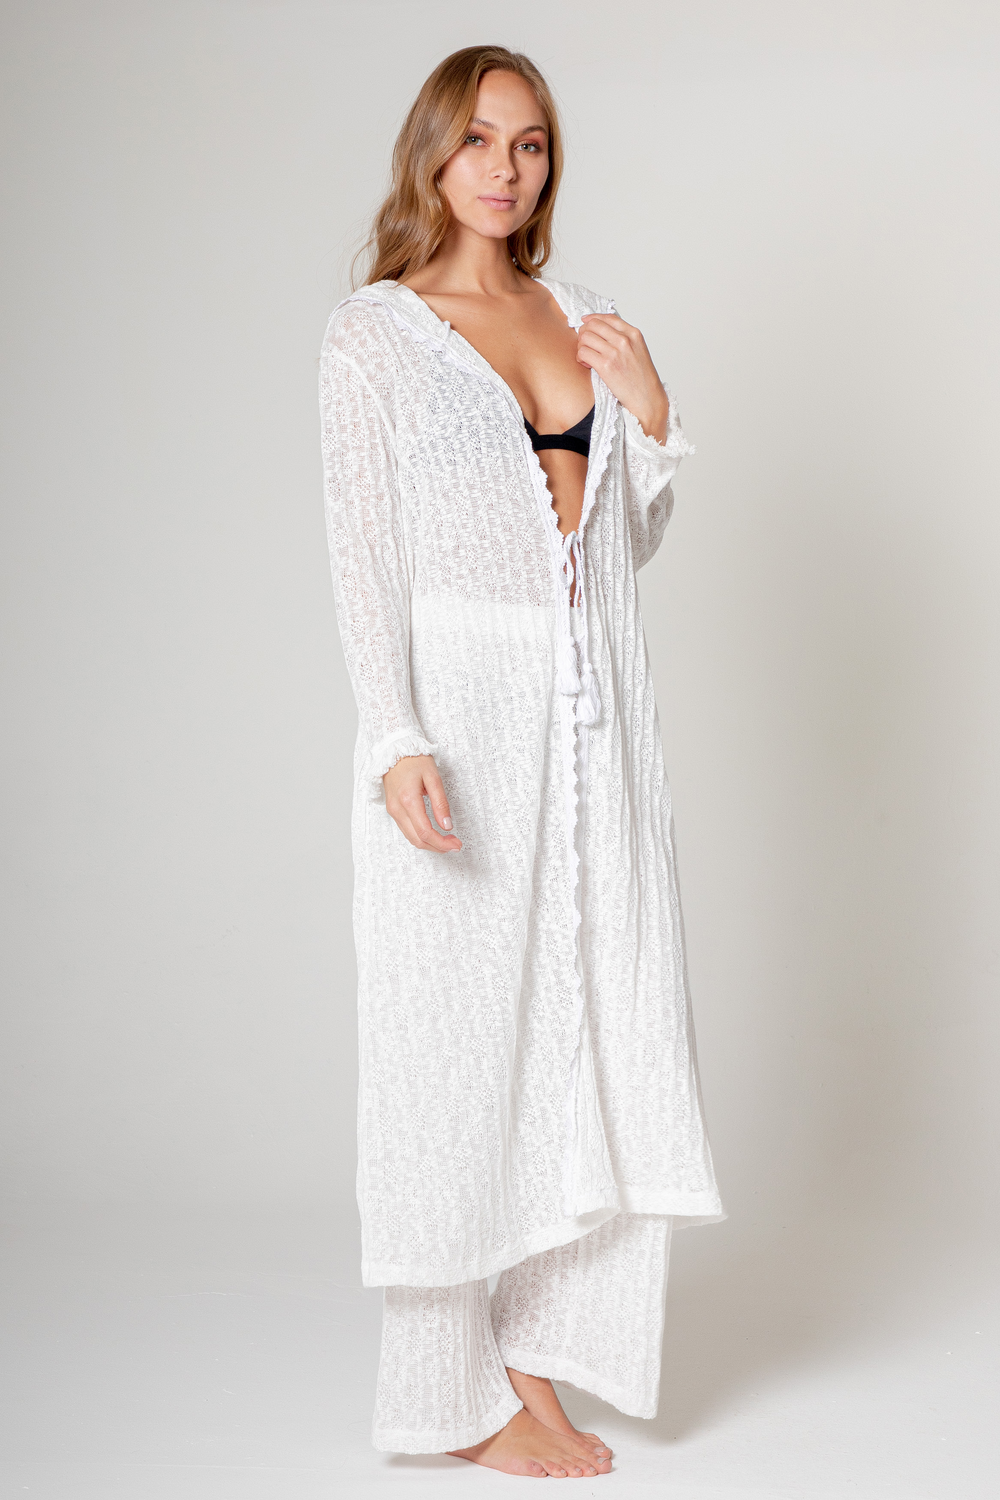 LONG CROCHET DUSTER WITH HOODIE - WHITE - Kingfisher Road - Online Boutique